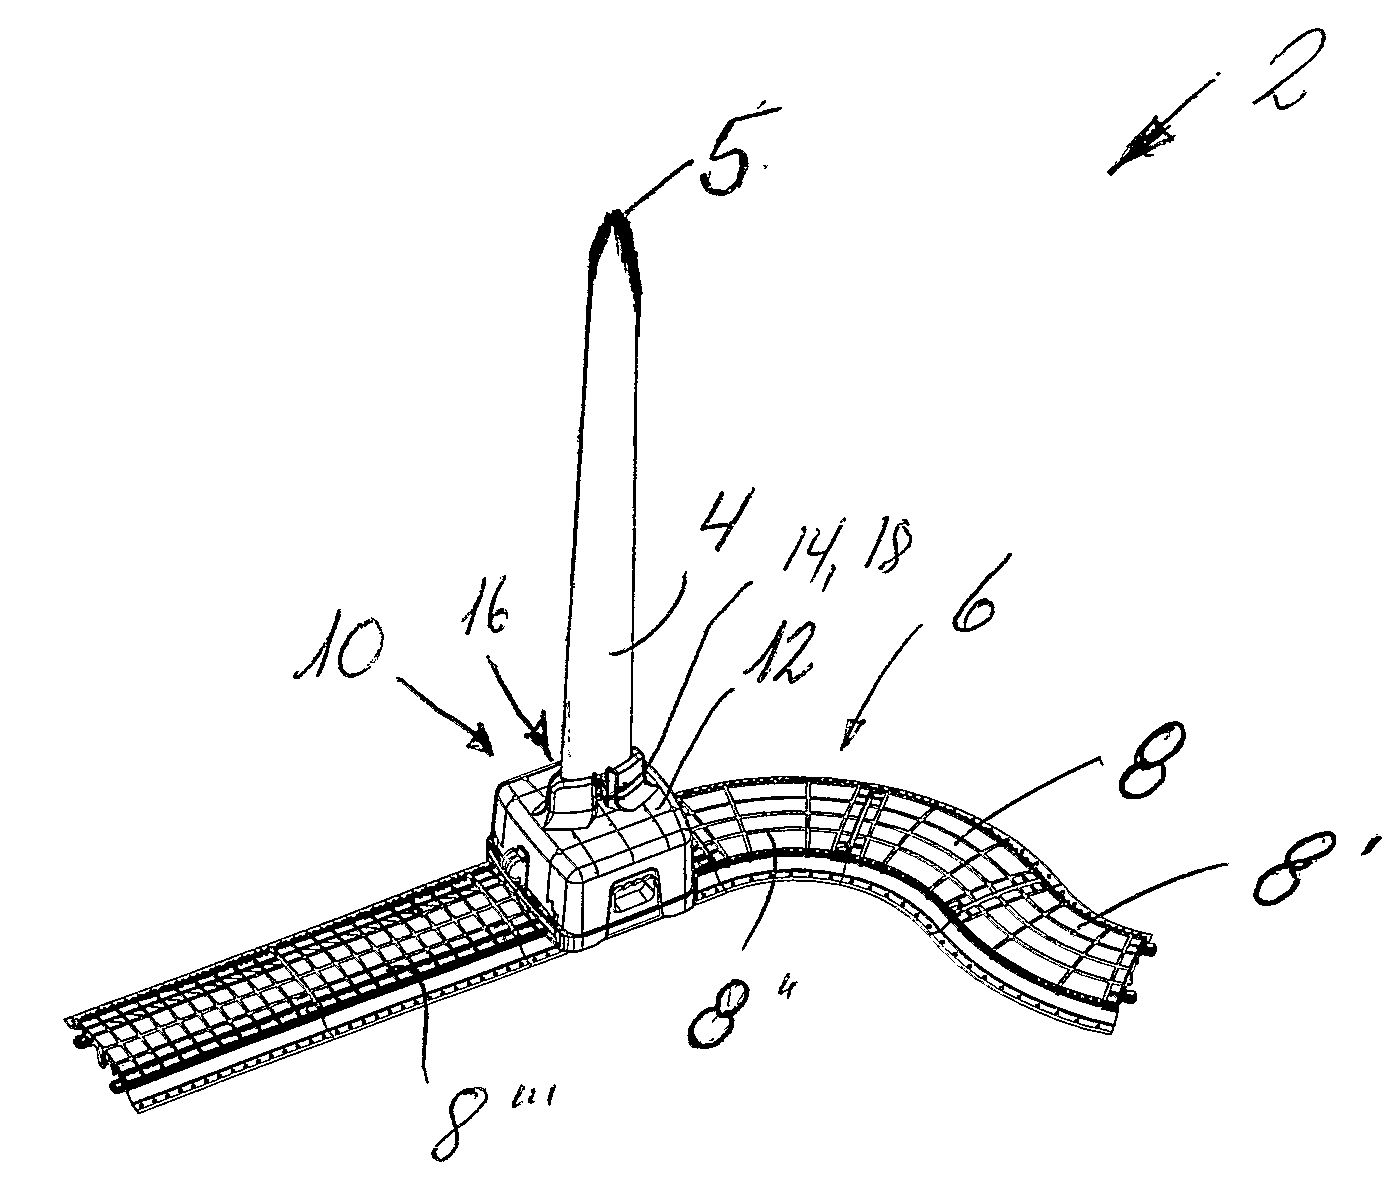 Mink-fox transportation  system for individual transfer/transport in connection with the production of mink/fox pelts